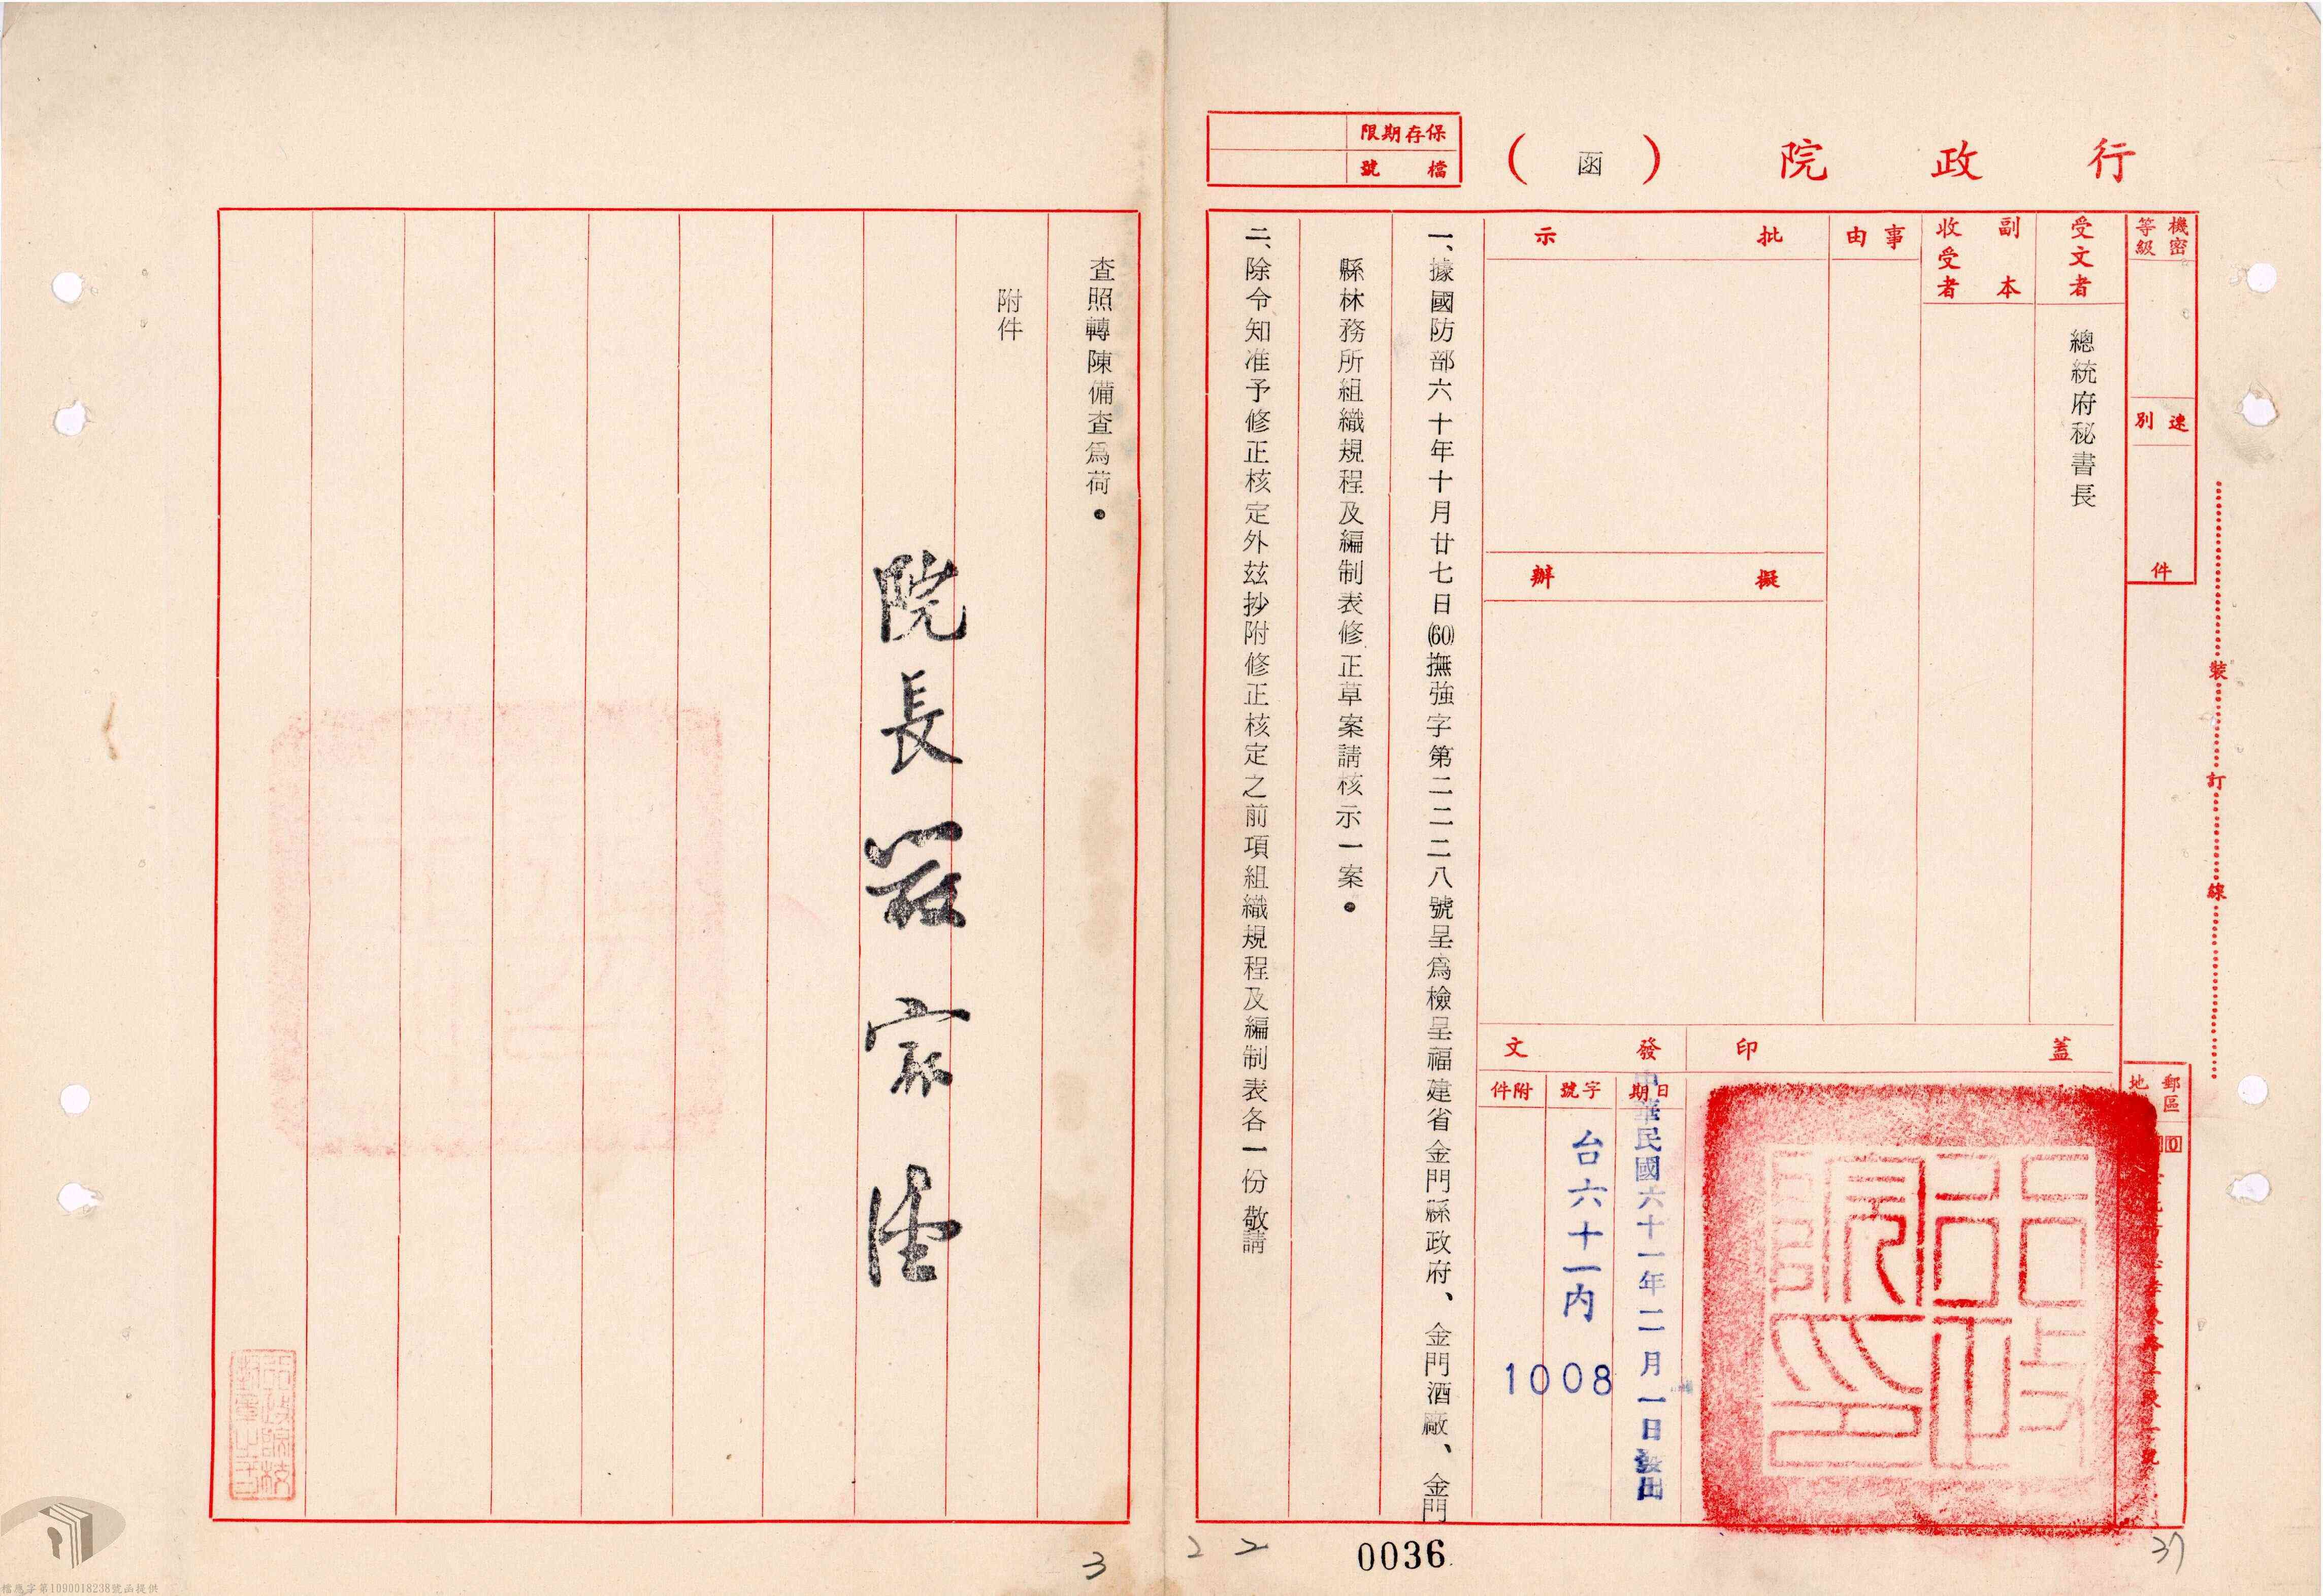 On February 1, 1972, the Executive Yuan amended and approved the organizational regulations of the Kinmen County Government, Kinmen Kaoliang Liquor Inc., and the Kinmen County Forestry Bureau of the Fujian Provincial Government.